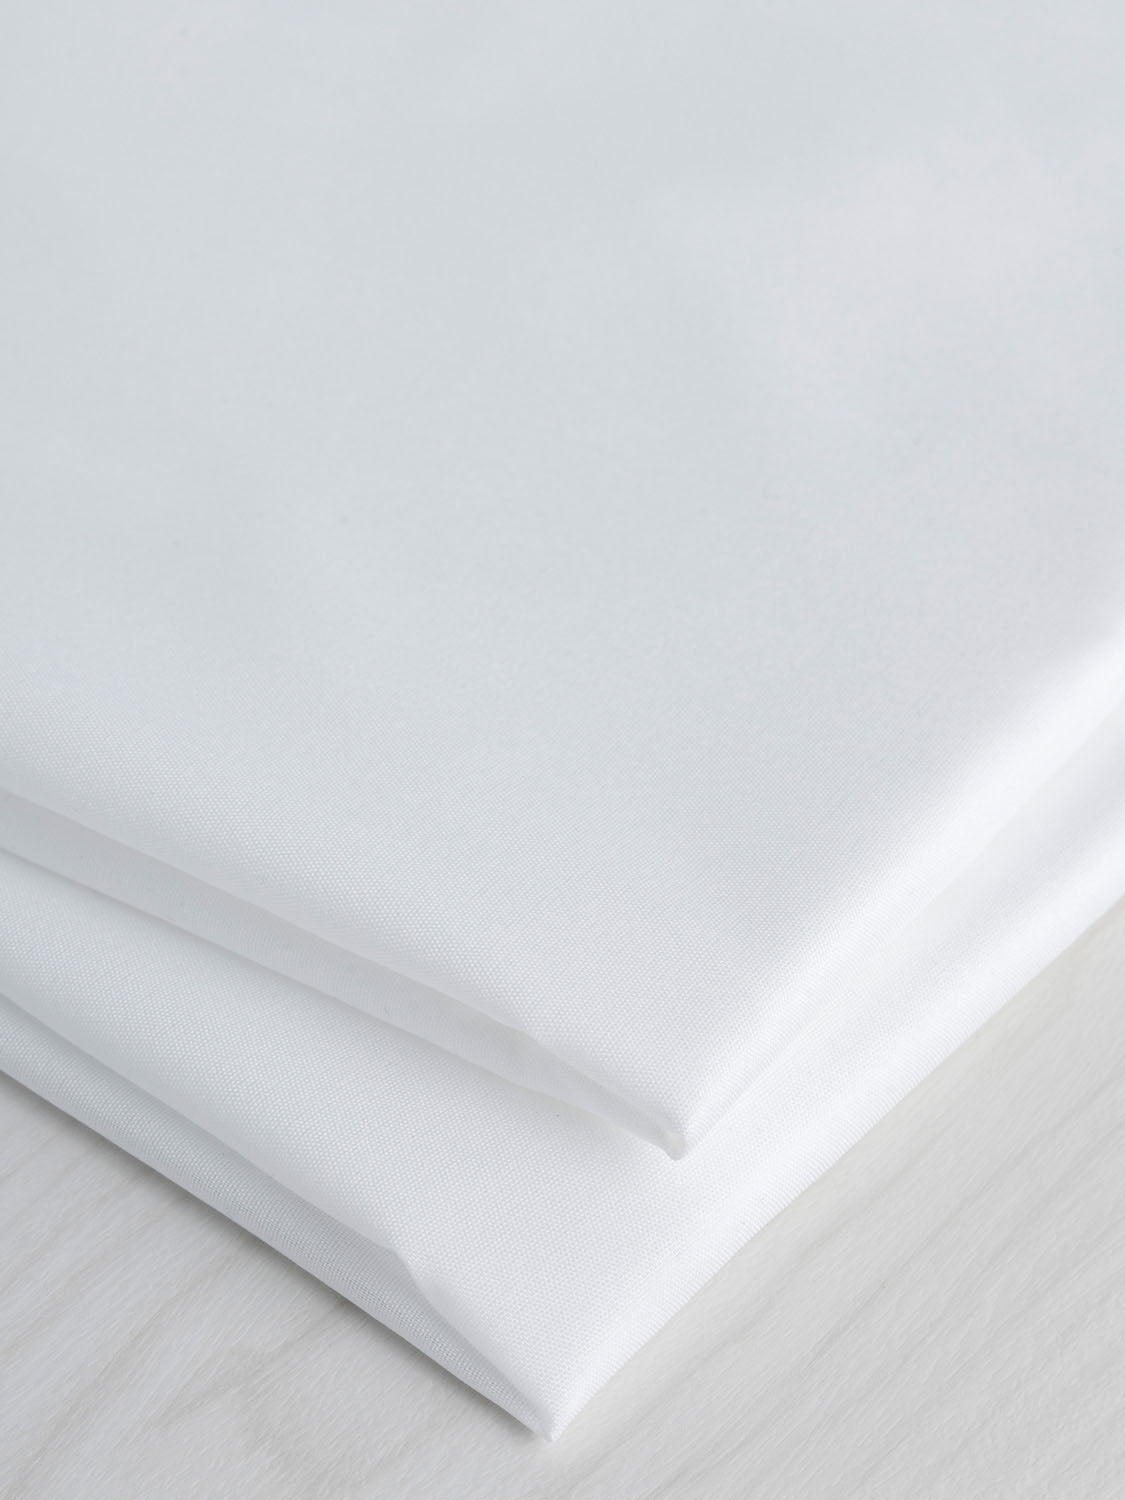 Iron-on interfacing fabric by the meter for lightweight fabrics